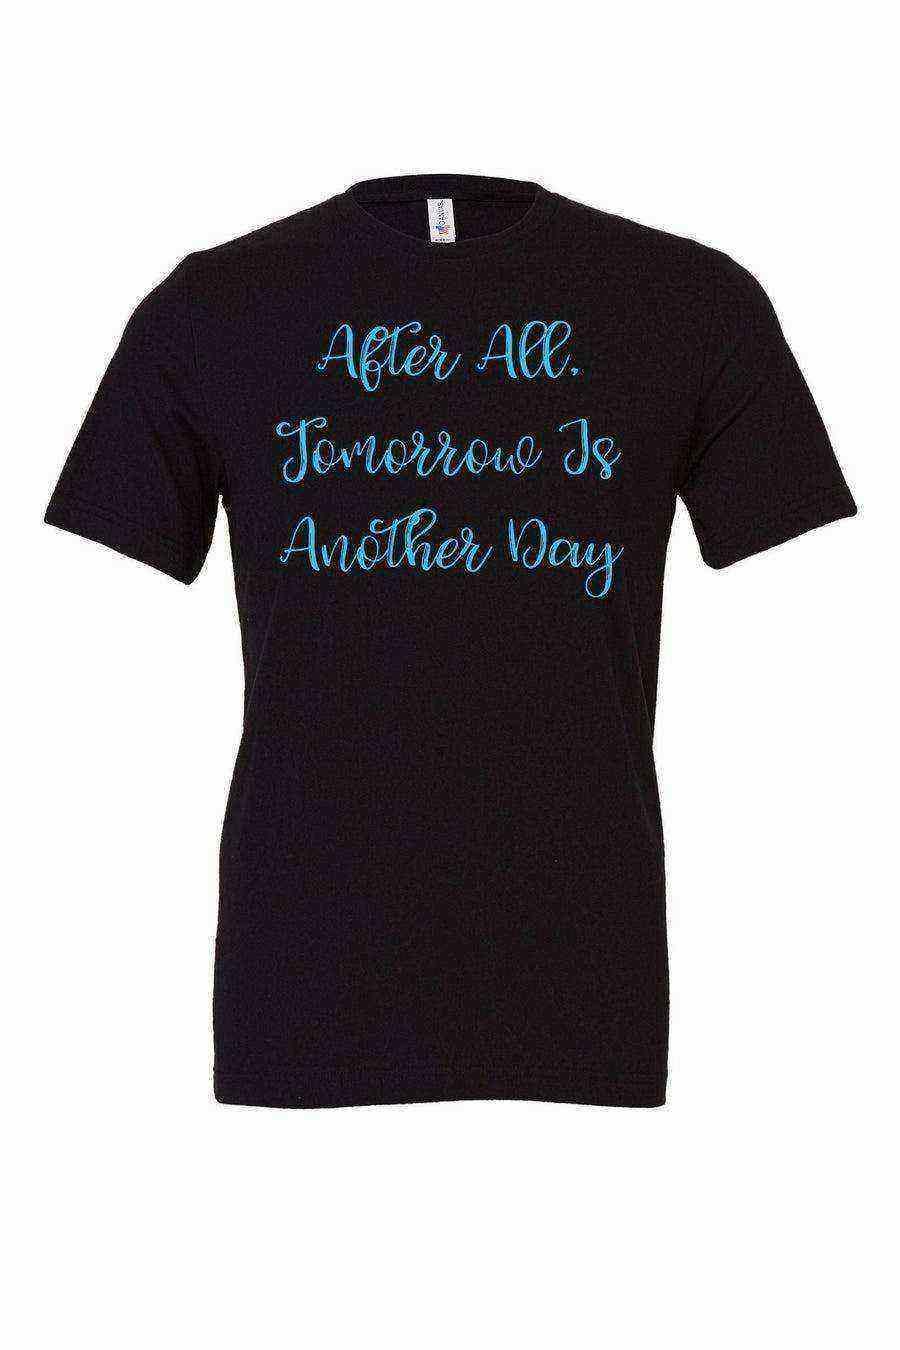 Womens | After All Tomorrow Is Another Day Shirt - Dylan's Tees